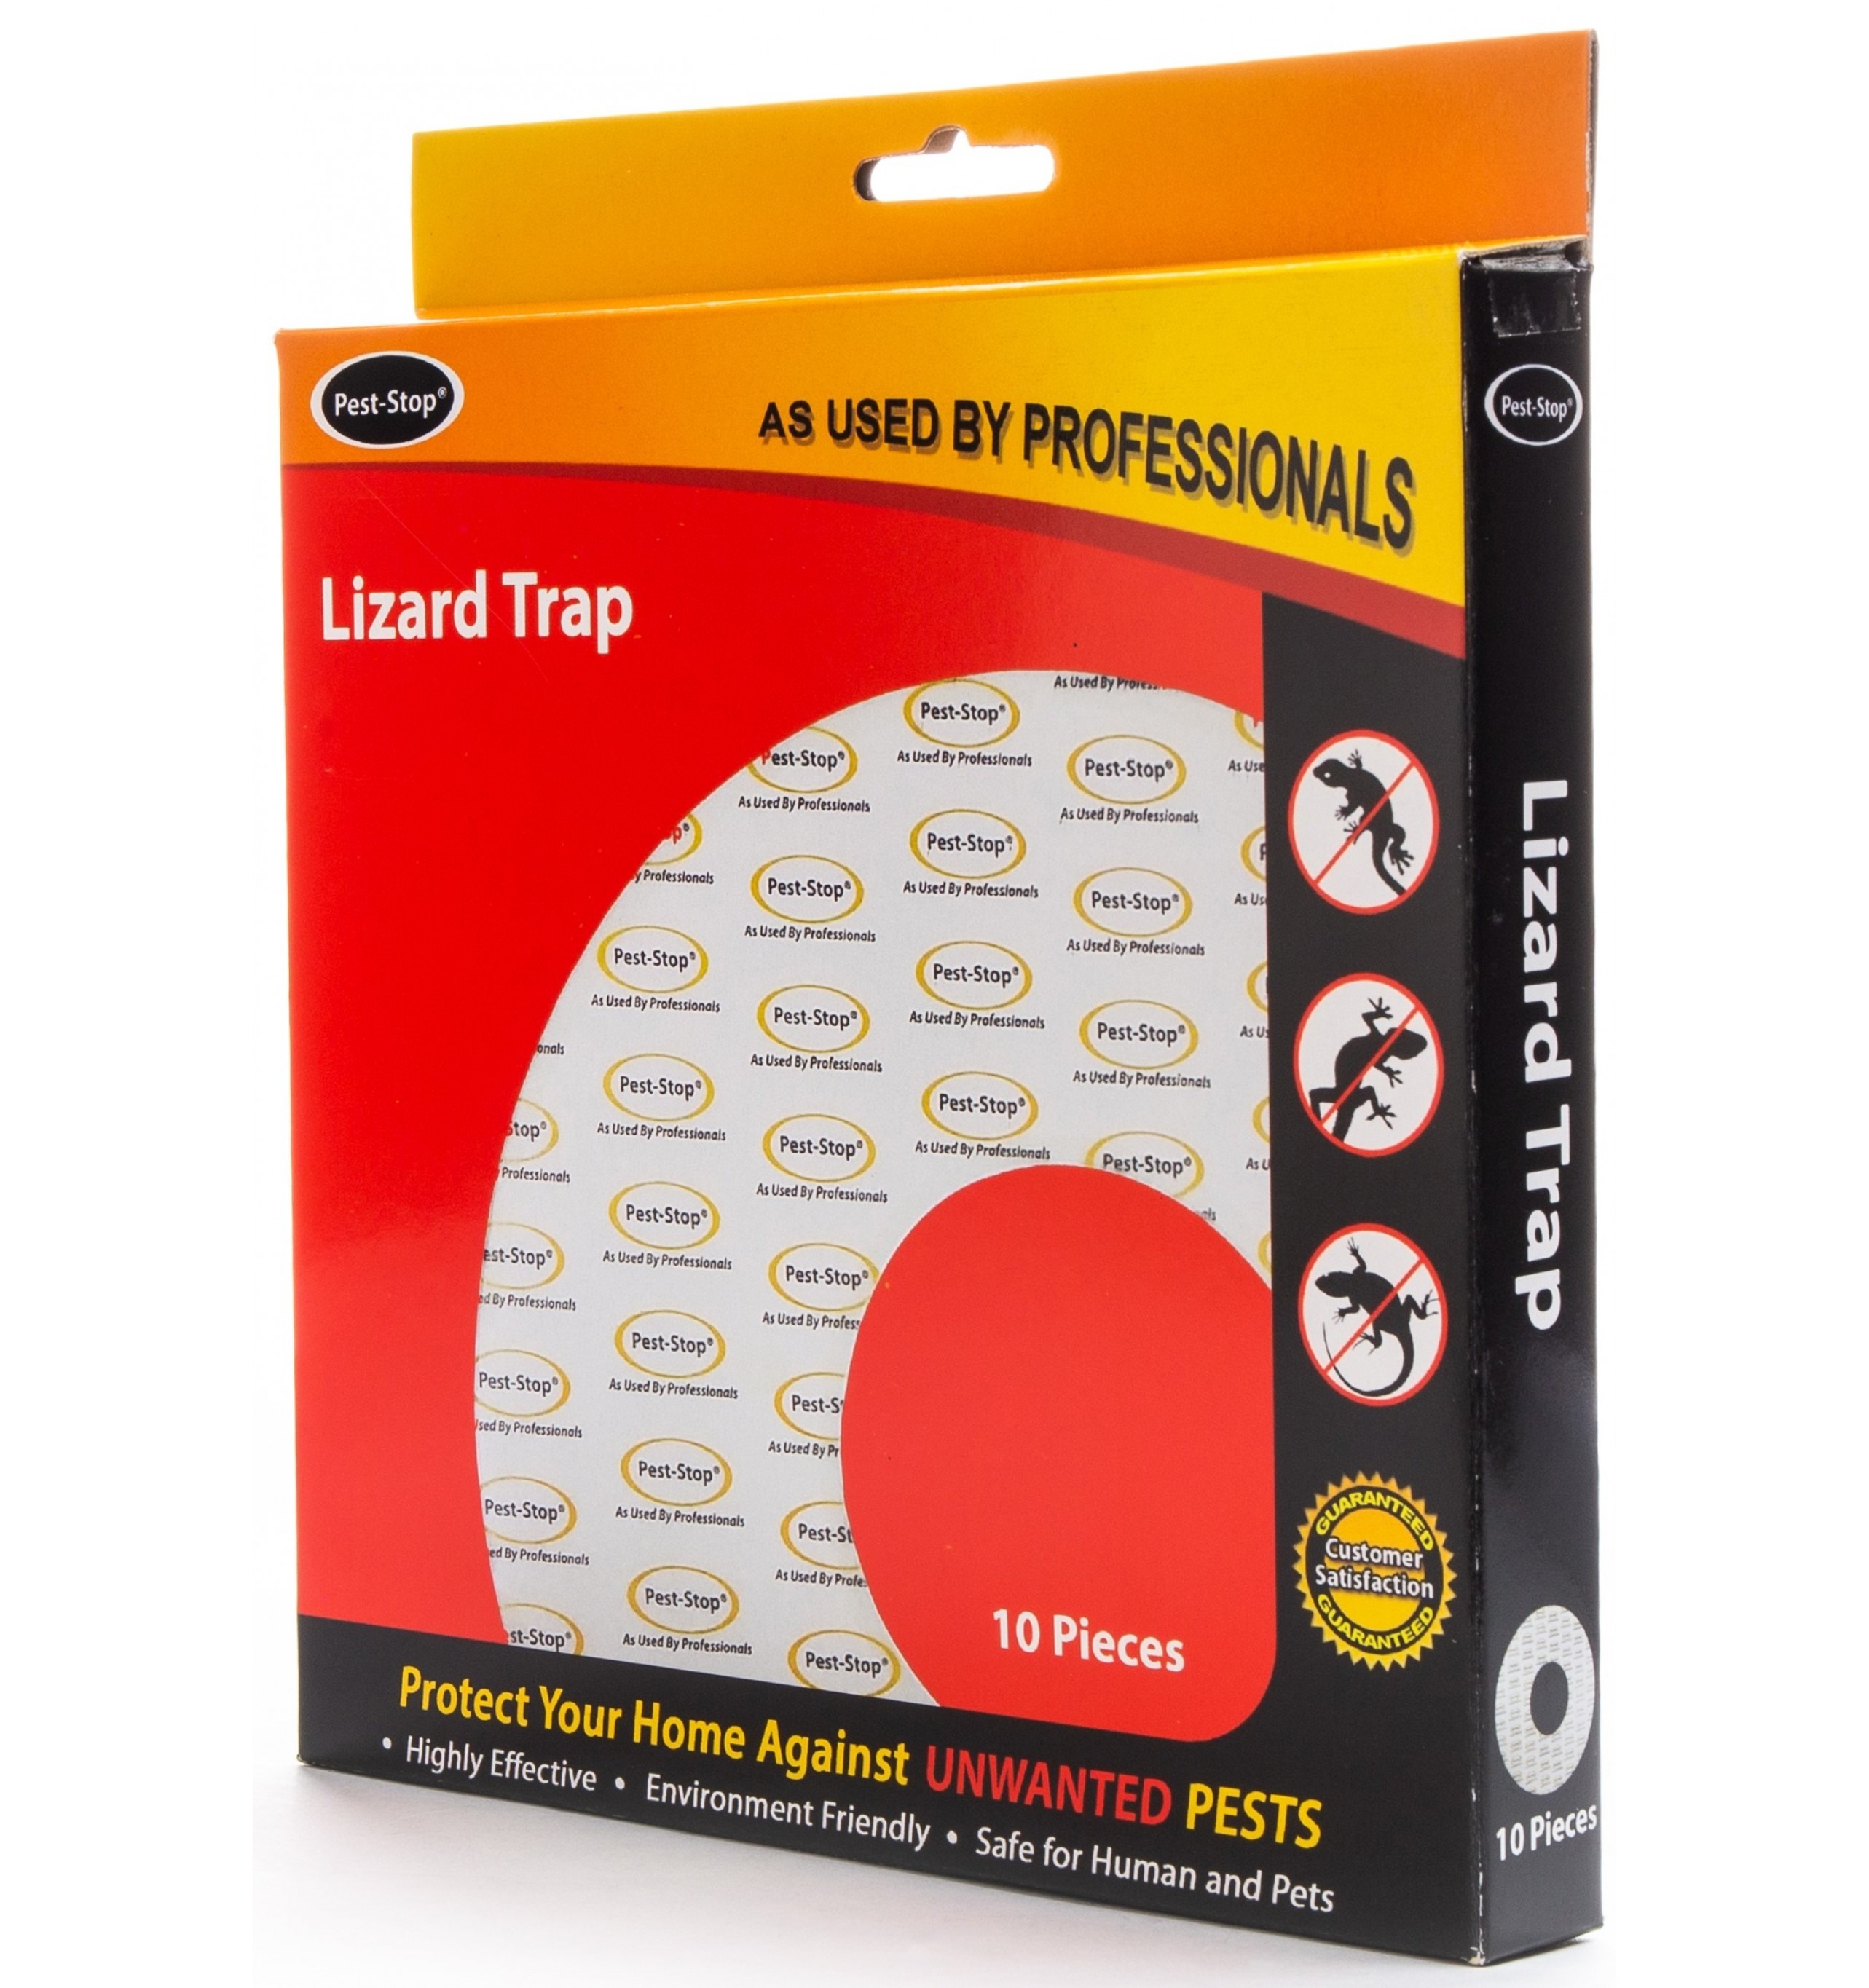 OLEE PEST-STOP LIZARD TRAP 10PPP, Insect & Pest Control Products